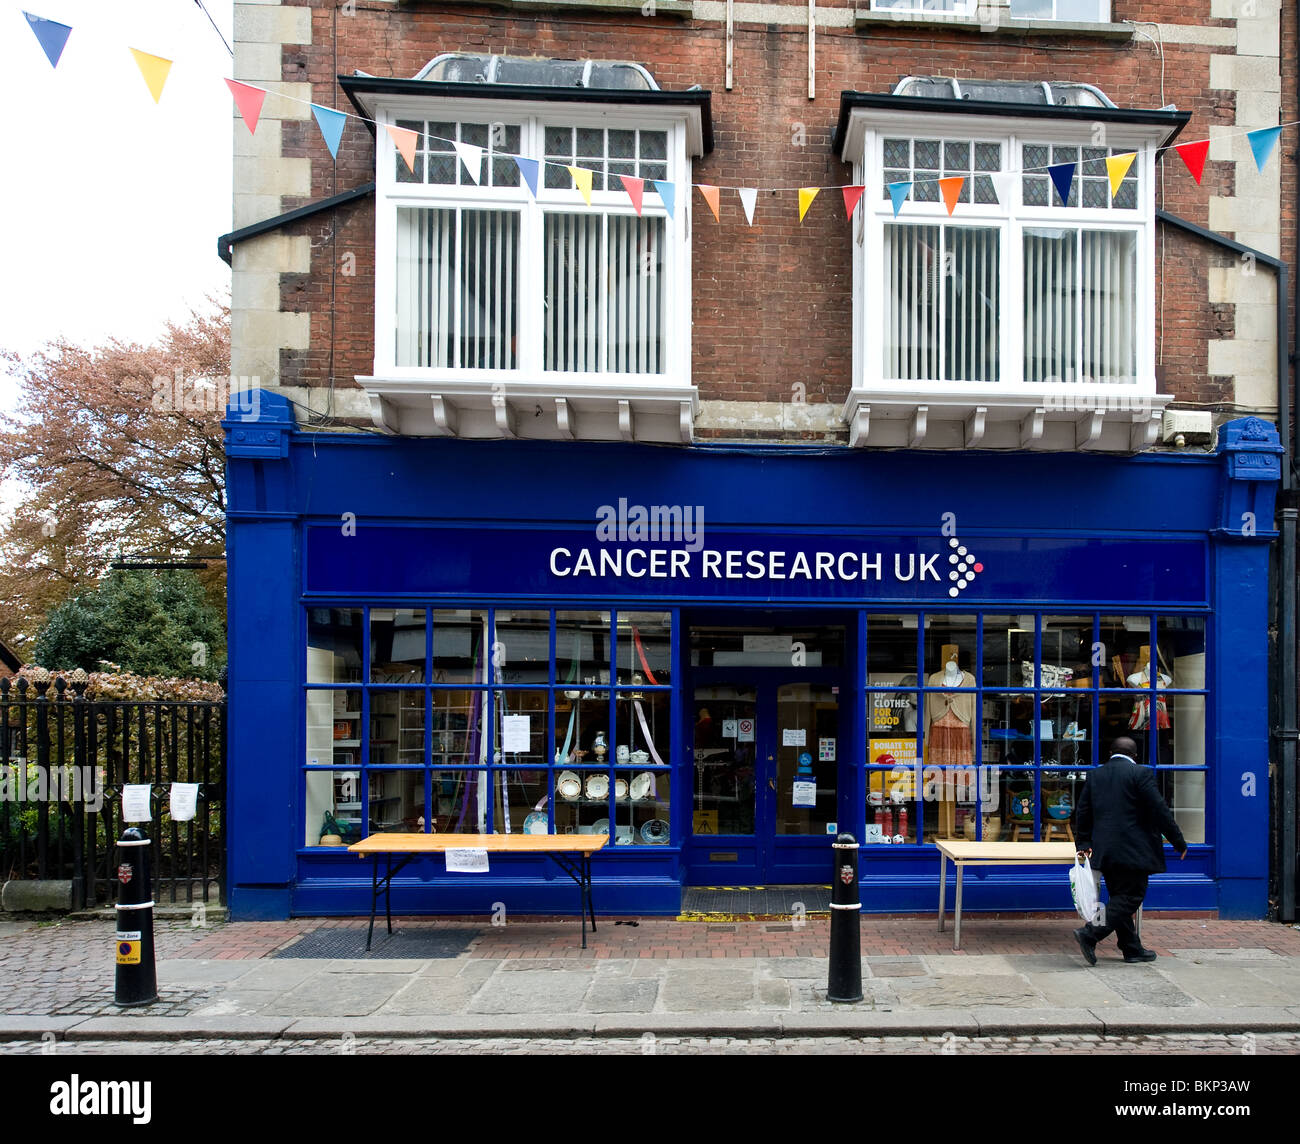 Cancer Research UK charity shop Banque D'Images